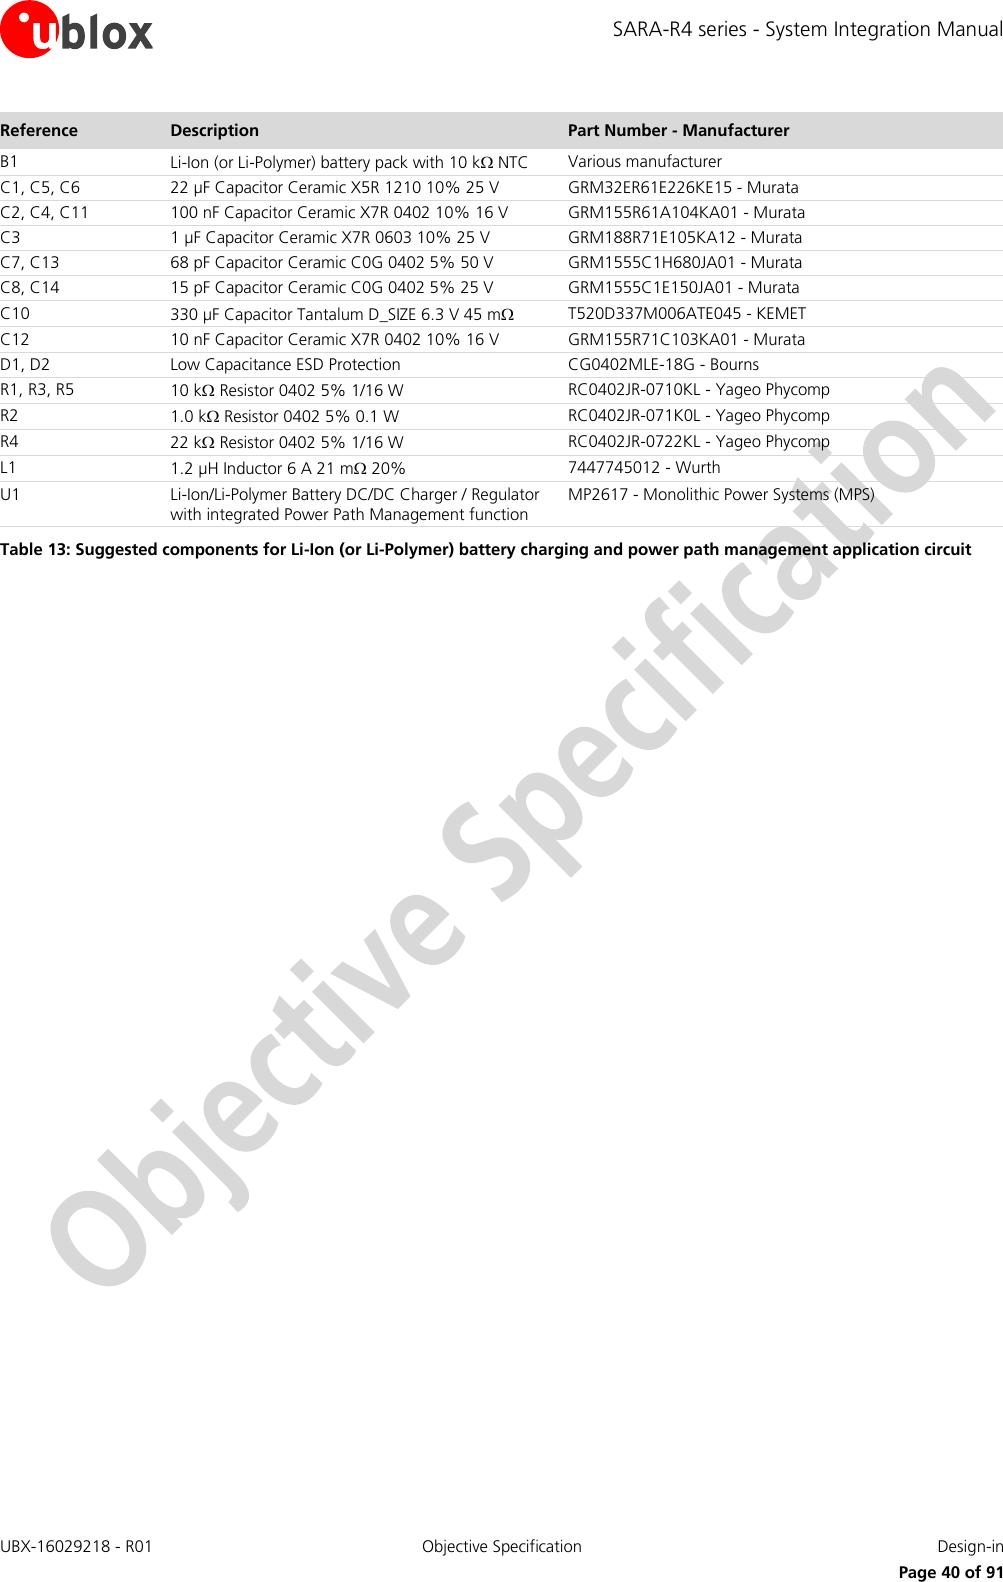 SARA-R4 series - System Integration Manual UBX-16029218 - R01  Objective Specification  Design-in     Page 40 of 91 Reference Description Part Number - Manufacturer B1 Li-Ion (or Li-Polymer) battery pack with 10 k NTC Various manufacturer C1, C5, C6 22 µF Capacitor Ceramic X5R 1210 10% 25 V GRM32ER61E226KE15 - Murata C2, C4, C11 100 nF Capacitor Ceramic X7R 0402 10% 16 V GRM155R61A104KA01 - Murata C3 1 µF Capacitor Ceramic X7R 0603 10% 25 V GRM188R71E105KA12 - Murata C7, C13 68 pF Capacitor Ceramic C0G 0402 5% 50 V GRM1555C1H680JA01 - Murata C8, C14 15 pF Capacitor Ceramic C0G 0402 5% 25 V GRM1555C1E150JA01 - Murata C10 330 µF Capacitor Tantalum D_SIZE 6.3 V 45 m T520D337M006ATE045 - KEMET C12 10 nF Capacitor Ceramic X7R 0402 10% 16 V GRM155R71C103KA01 - Murata D1, D2 Low Capacitance ESD Protection CG0402MLE-18G - Bourns R1, R3, R5 10 k Resistor 0402 5% 1/16 W RC0402JR-0710KL - Yageo Phycomp R2 1.0 k Resistor 0402 5% 0.1 W RC0402JR-071K0L - Yageo Phycomp R4 22 k Resistor 0402 5% 1/16 W RC0402JR-0722KL - Yageo Phycomp L1 1.2 µH Inductor 6 A 21 m 20% 7447745012 - Wurth U1 Li-Ion/Li-Polymer Battery DC/DC Charger / Regulator with integrated Power Path Management function MP2617 - Monolithic Power Systems (MPS) Table 13: Suggested components for Li-Ion (or Li-Polymer) battery charging and power path management application circuit   